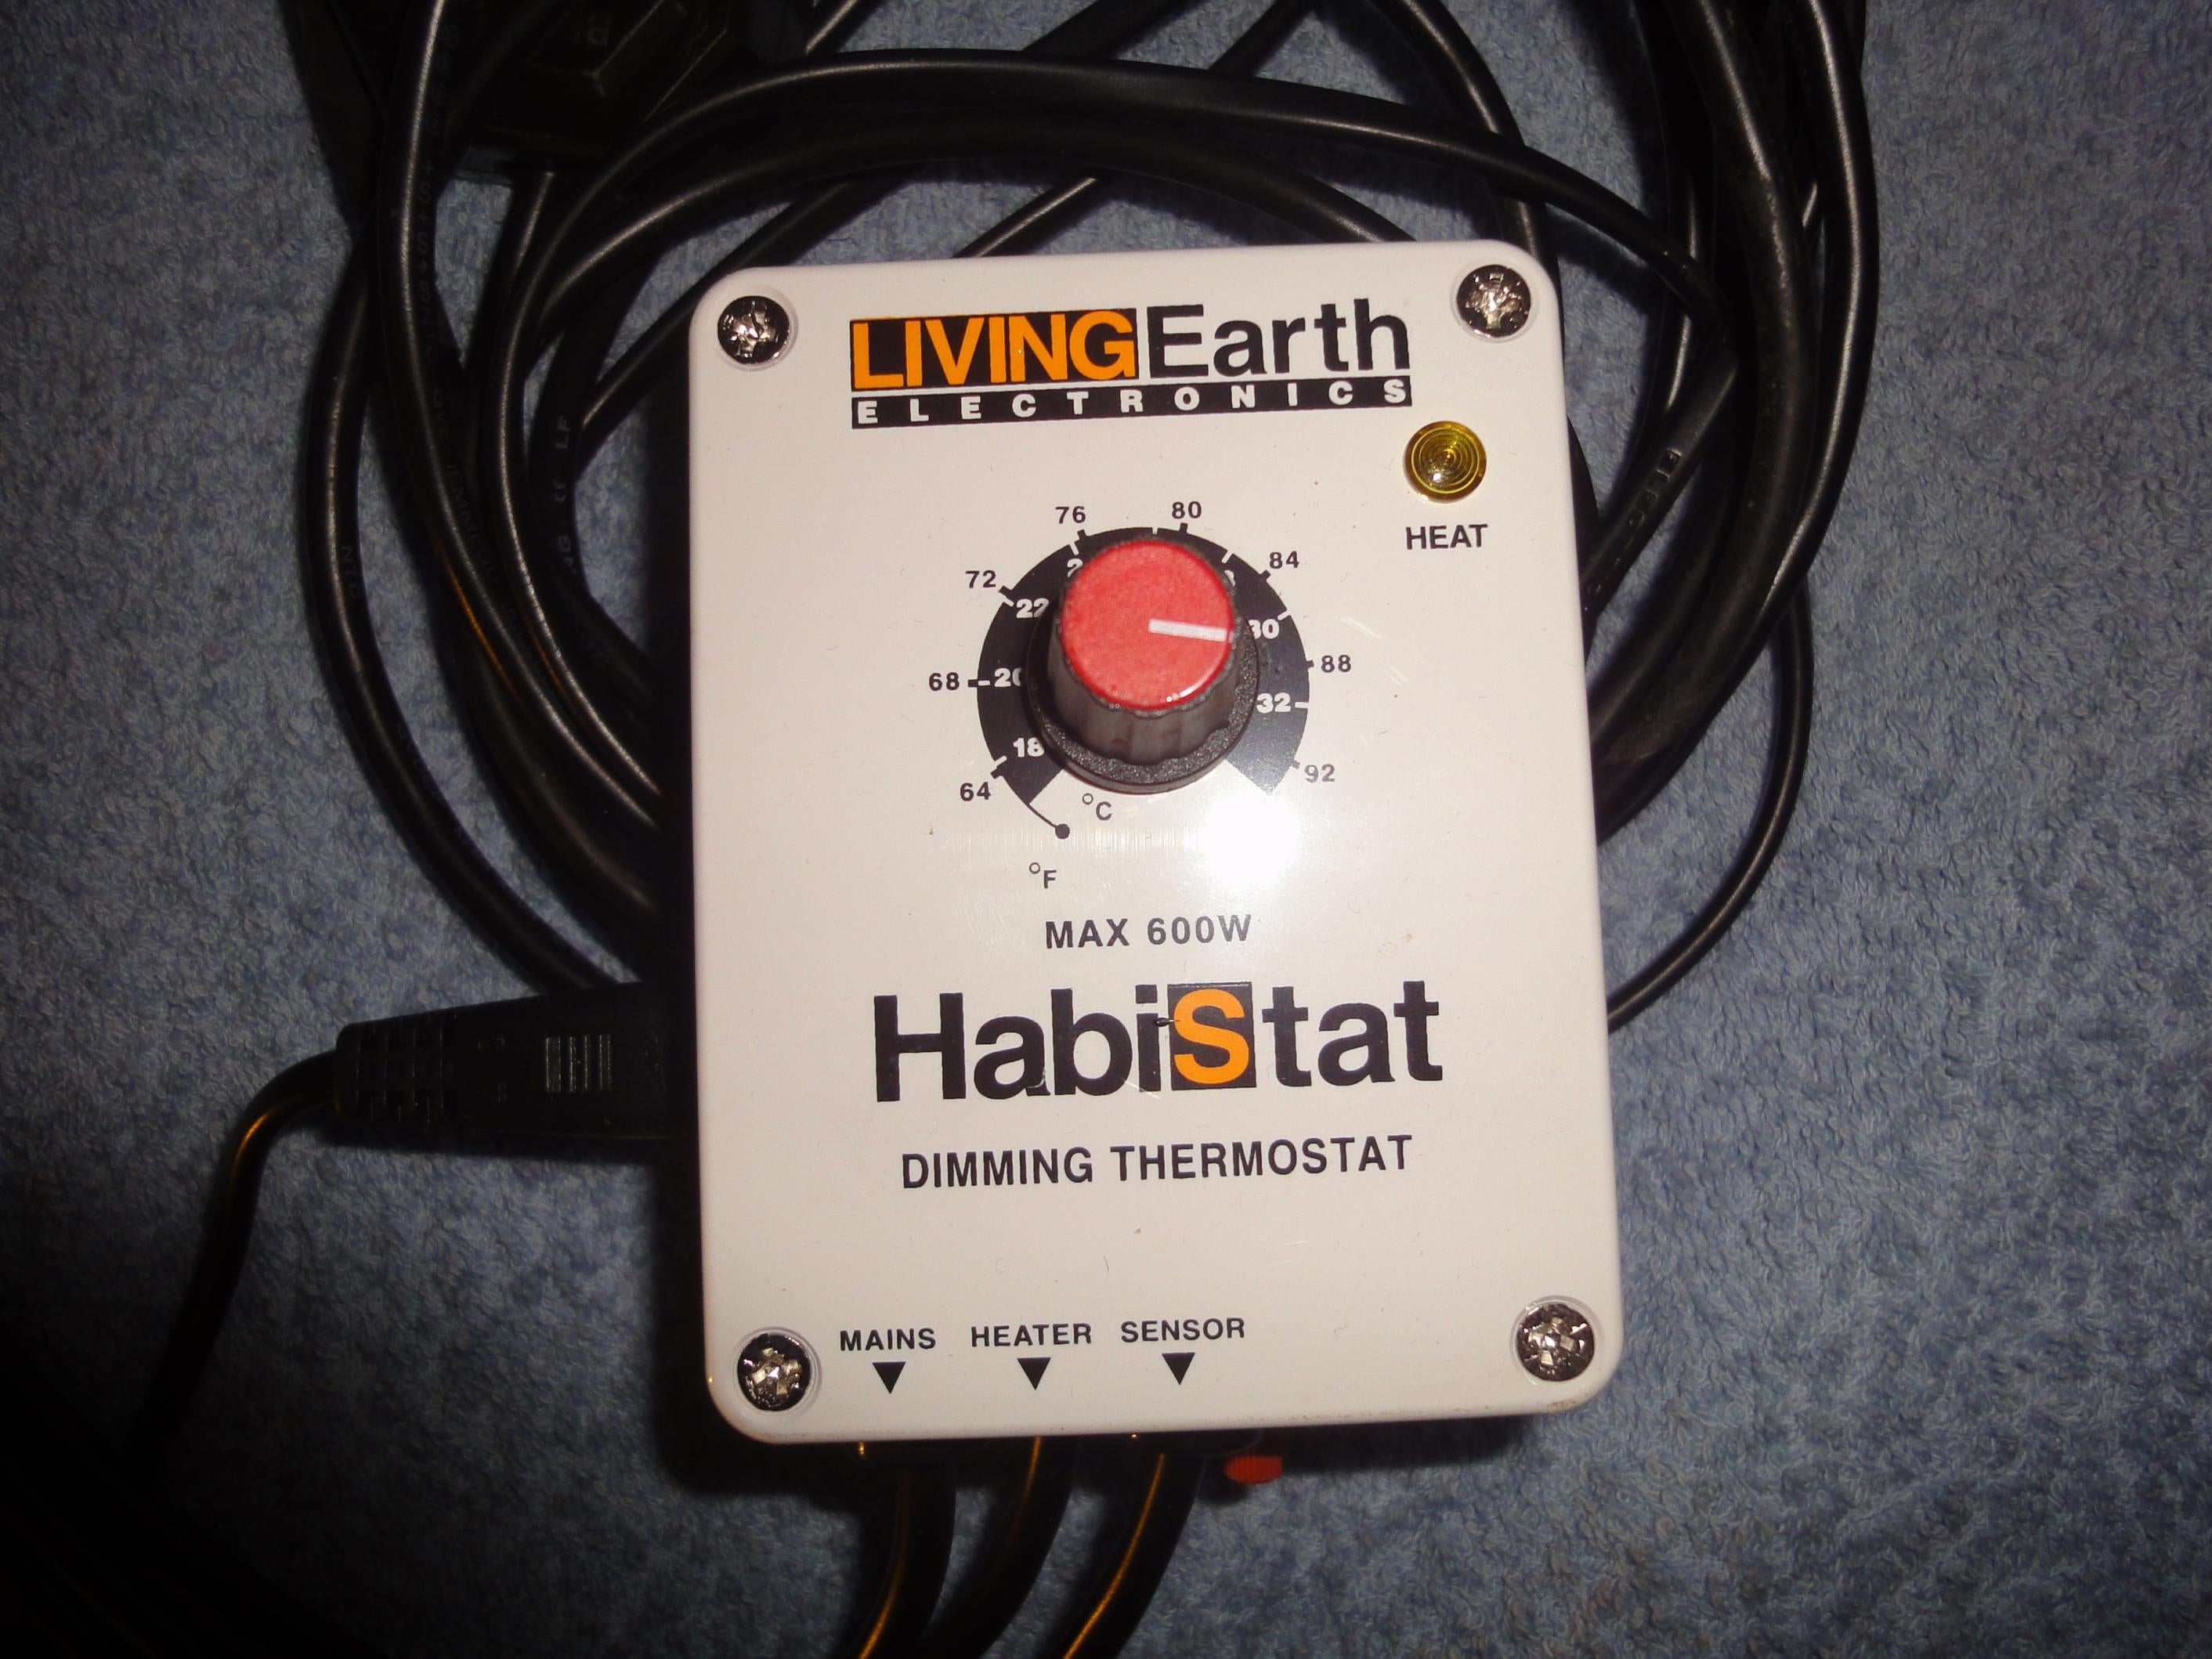 habistat dimming thermostat instructions